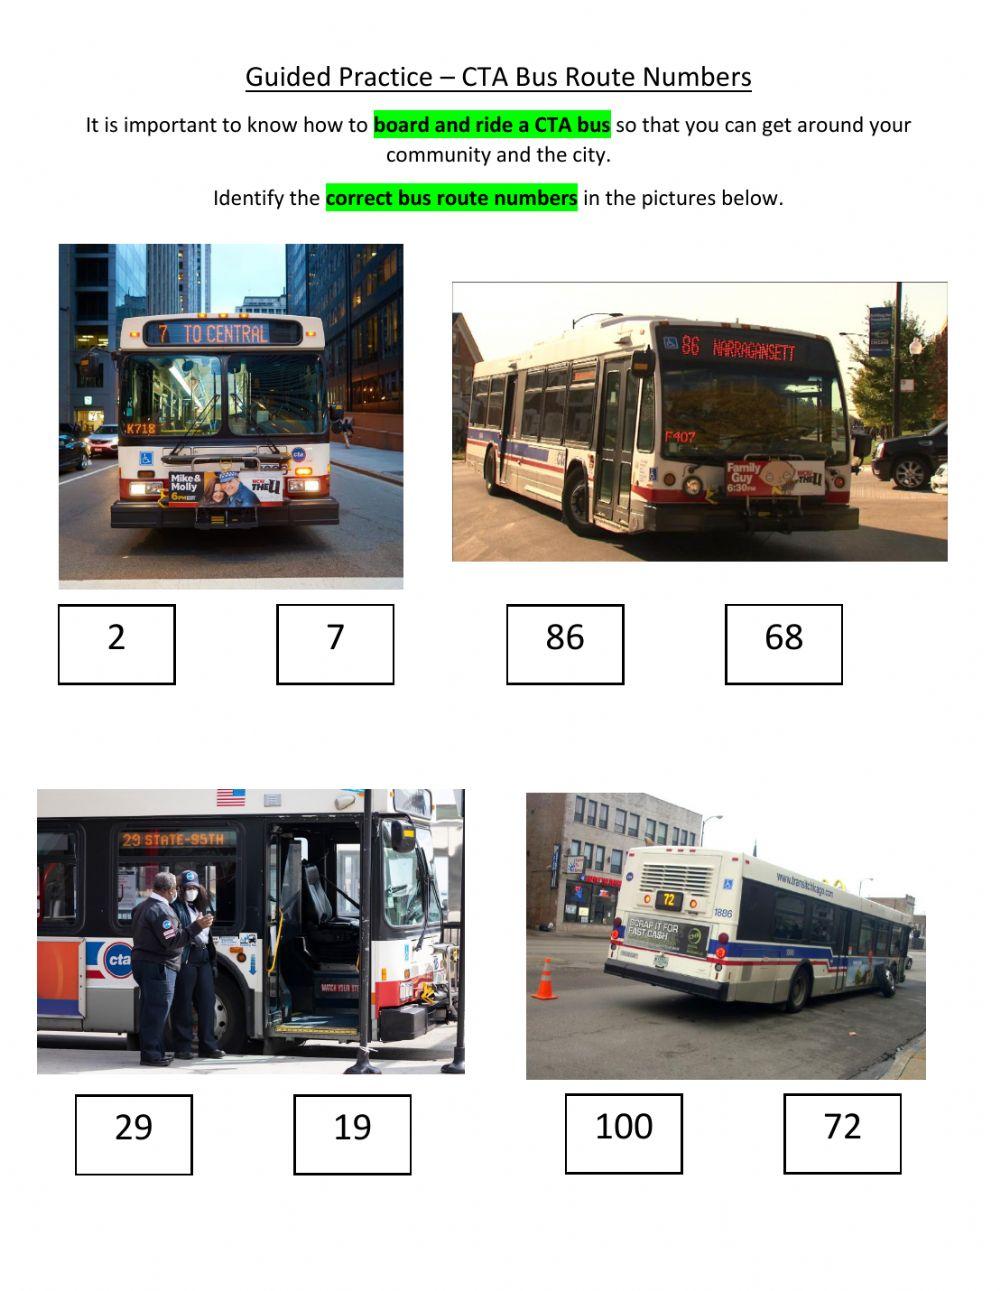 Guided Practice - CTA Bus Route Numbers